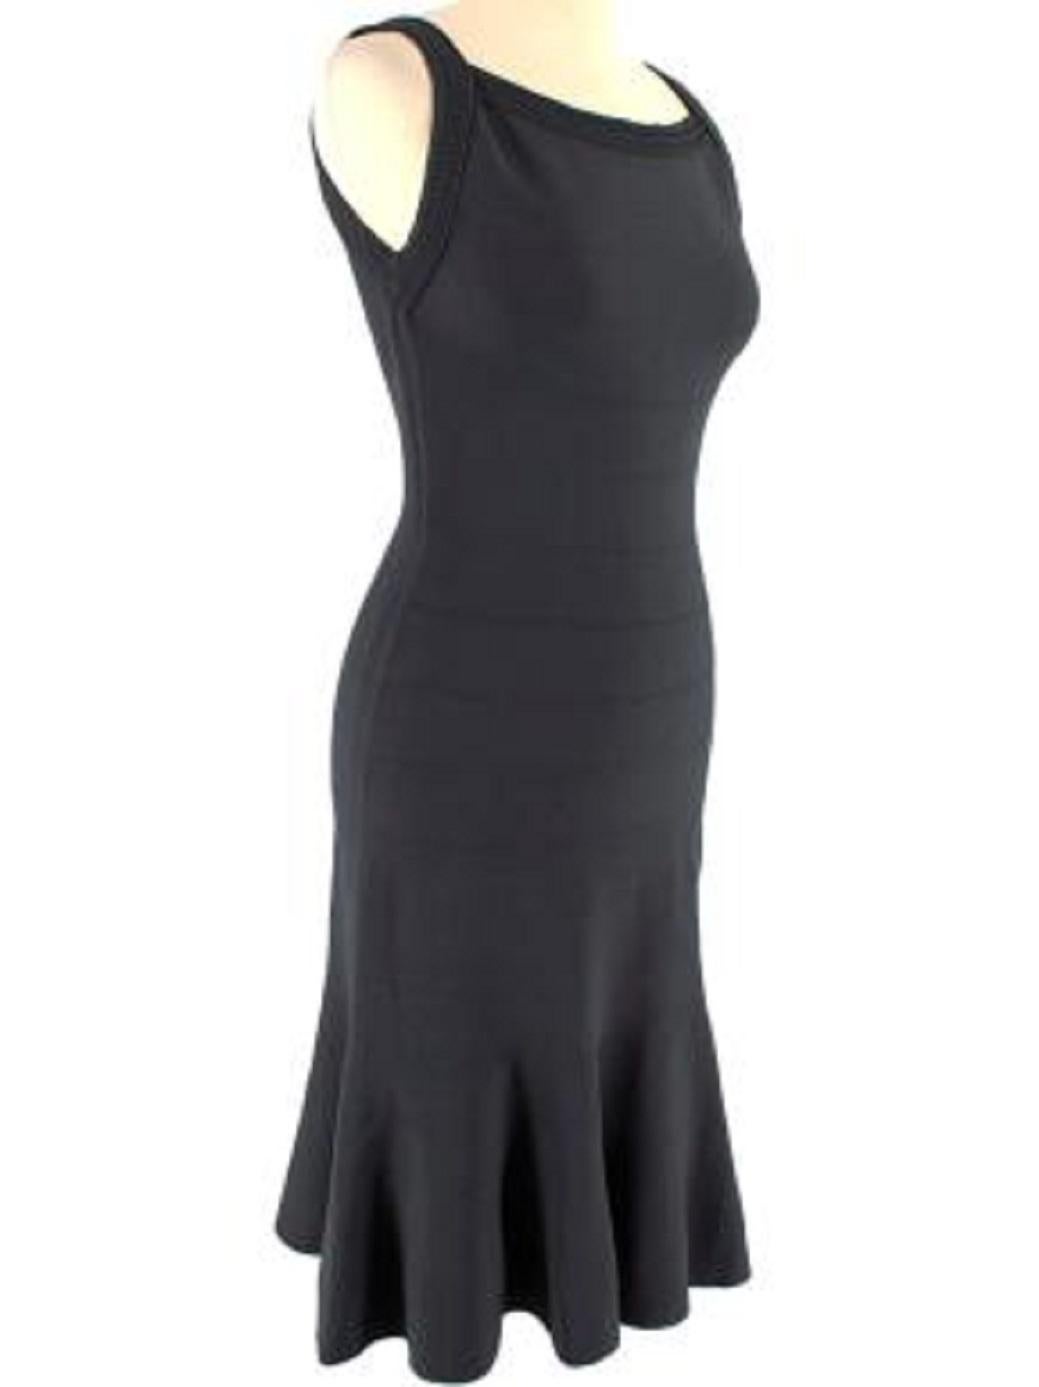 Women's Alaia Grey Fit & Flare Stretch Knit Dress For Sale